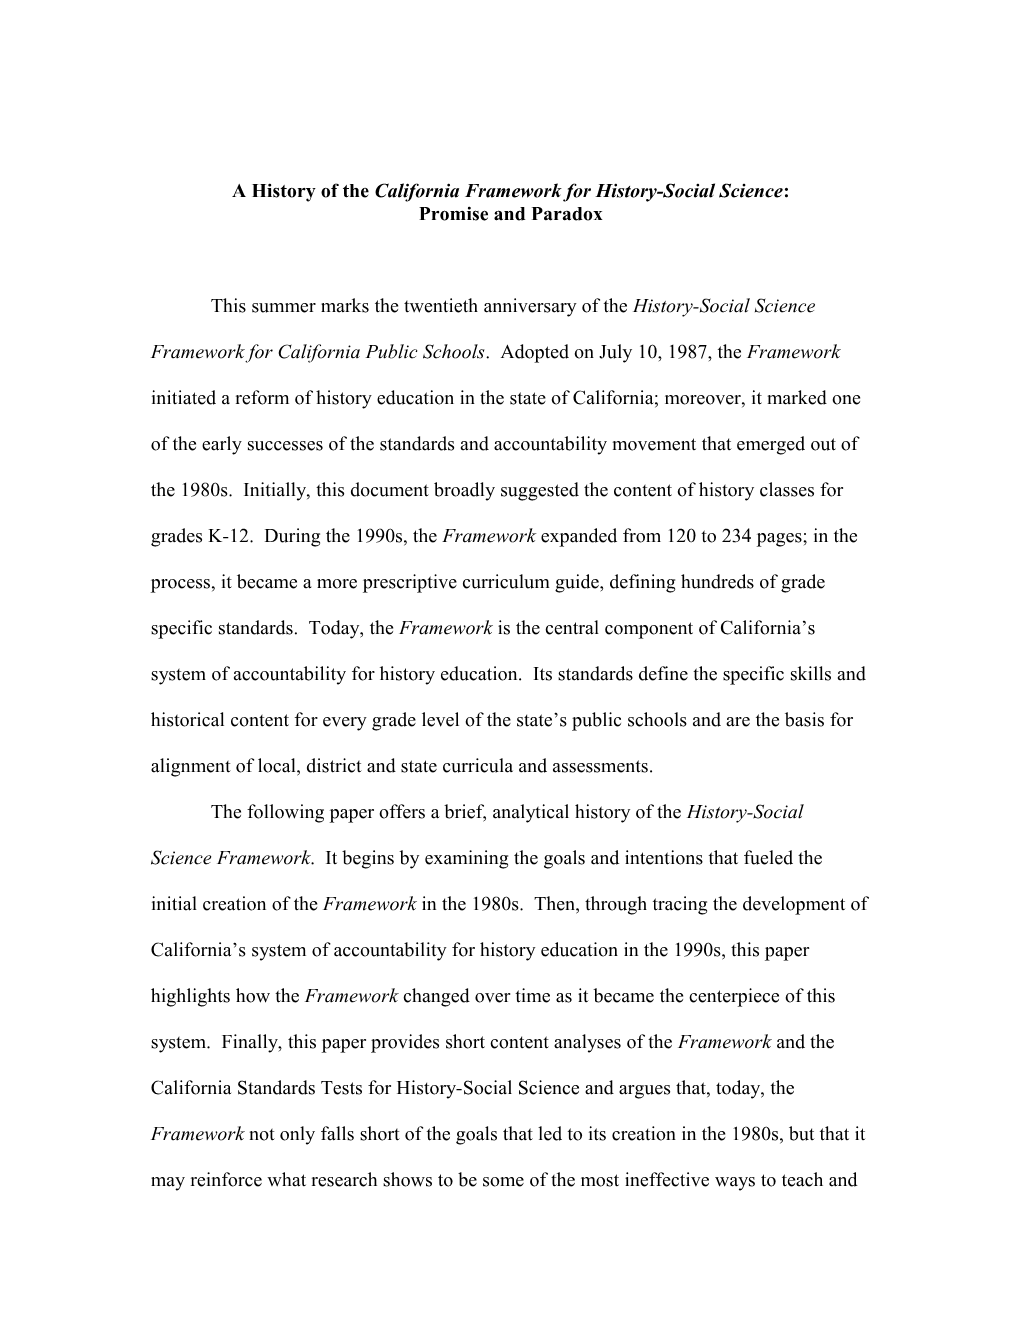 A History of the California Framework for History-Social Science